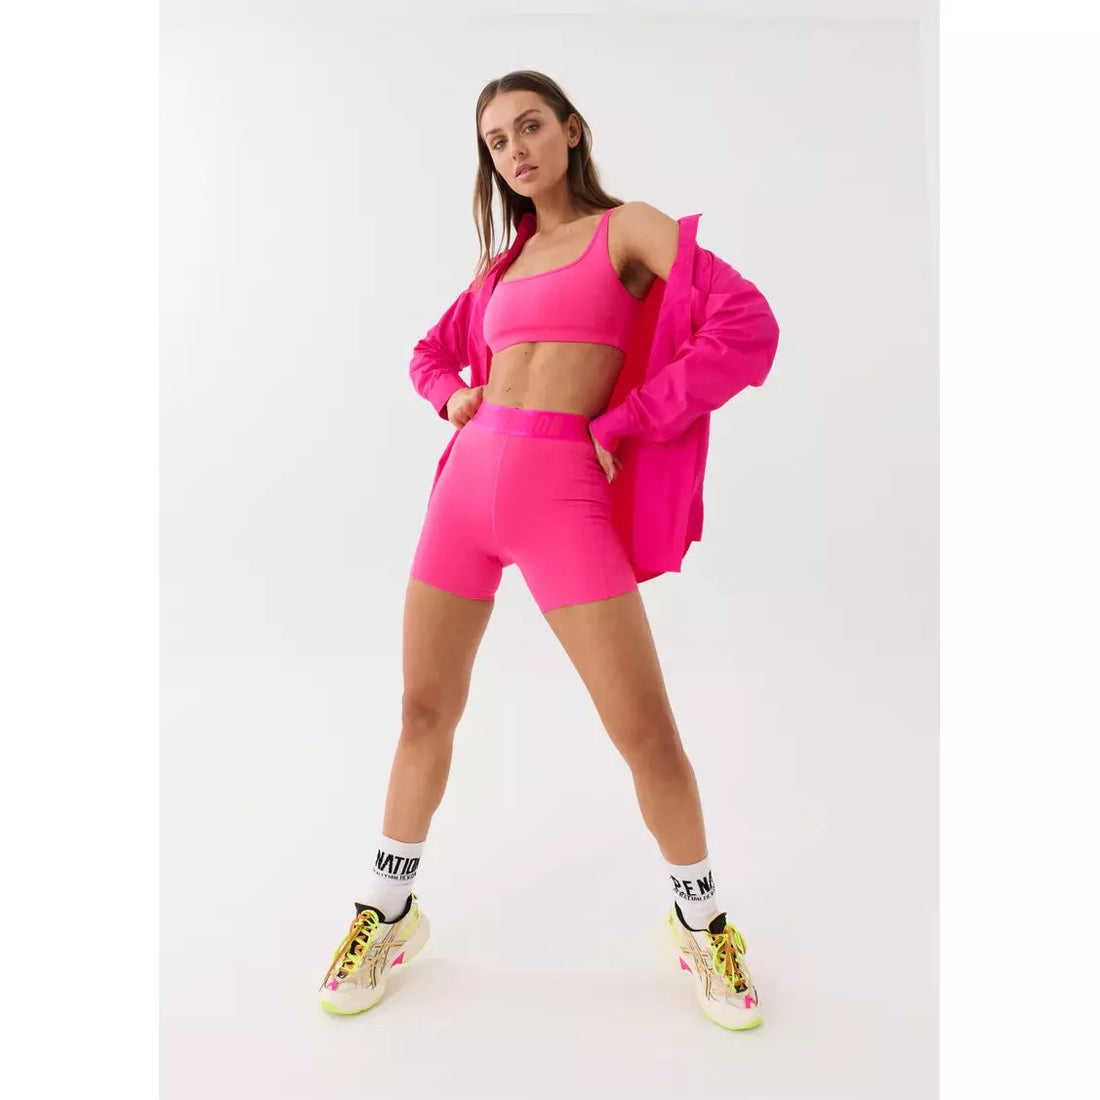 P.E Nation Interval Shirt - Pink Glo